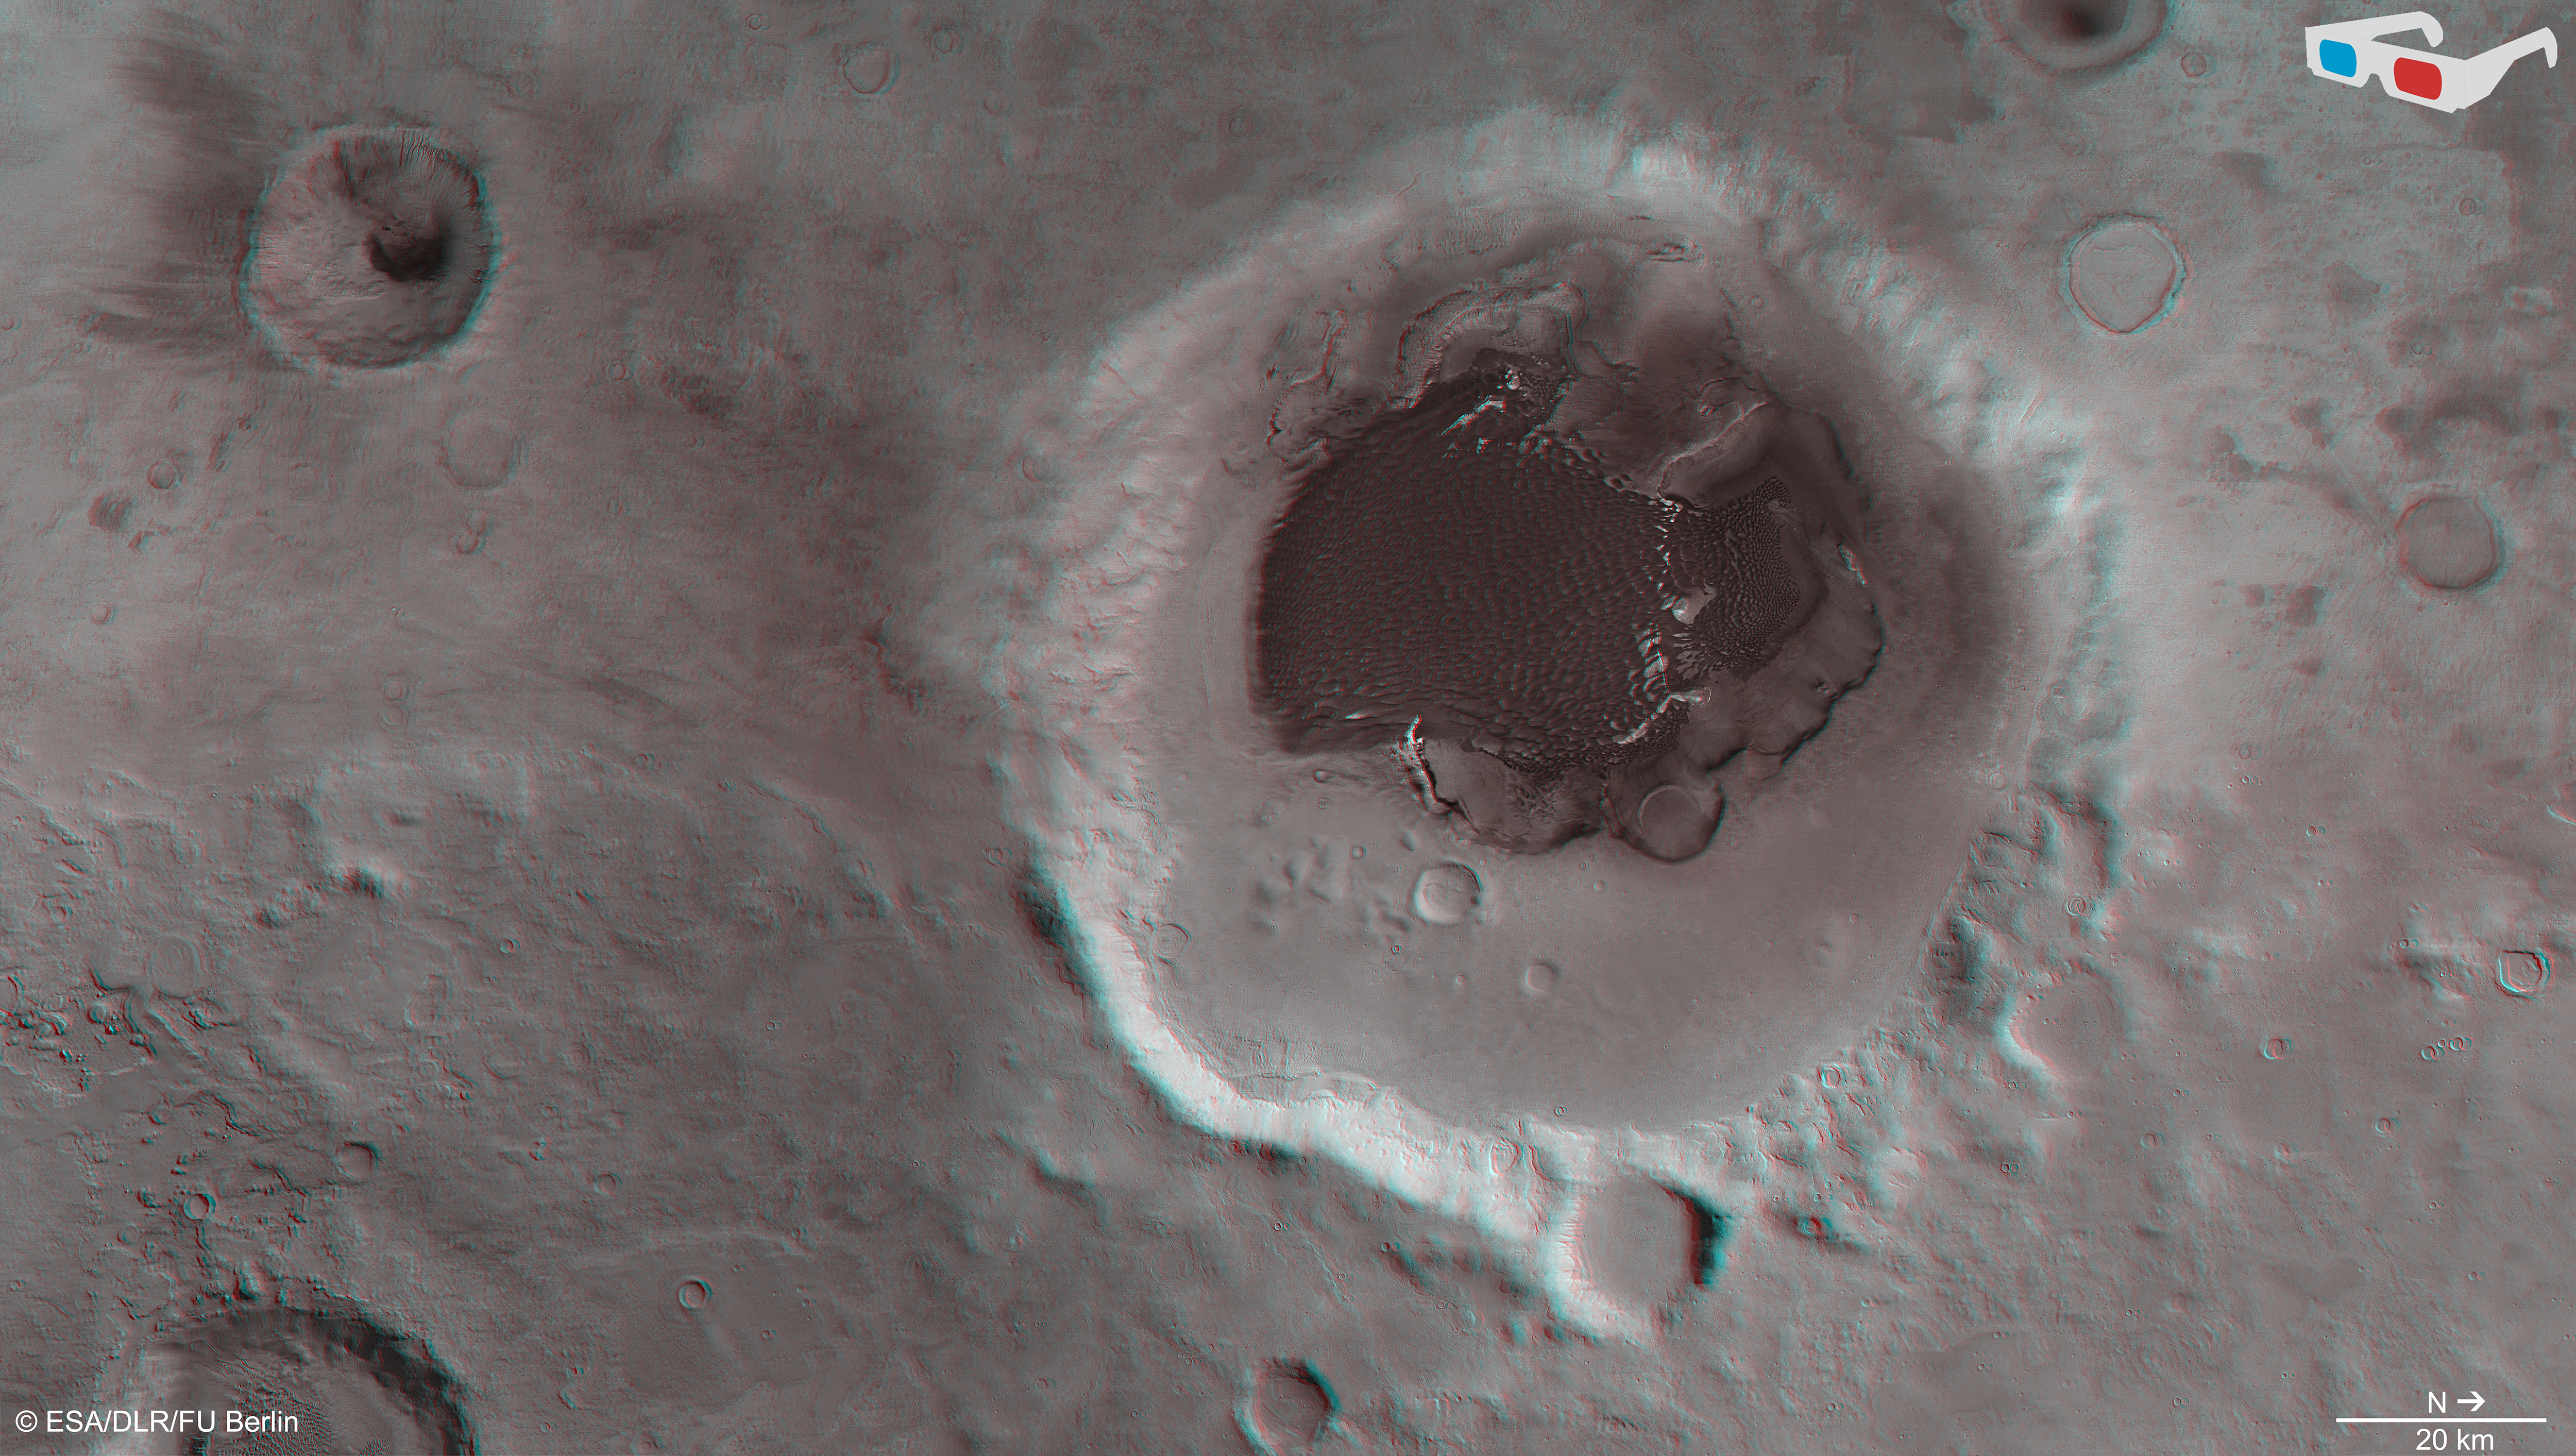 Data from the nadir channel and one stereo channel of the High Resolution Stereo Camera on Mars Express have been combined to produce this anaglyph 3D image, which can be viewed using stereoscopic glasses with red–green or red–blue filters. The image focuses on Rabe crater and its intricate dune field, material that has been shaped by prevailing winds. The image was created using data acquired with the High Resolution Stereo Camera on Mars Express on 7 December 2005 (orbit 2441) and 9 January 2014 (orbit 12736). Credit: ESA/DLR/FU Berlin